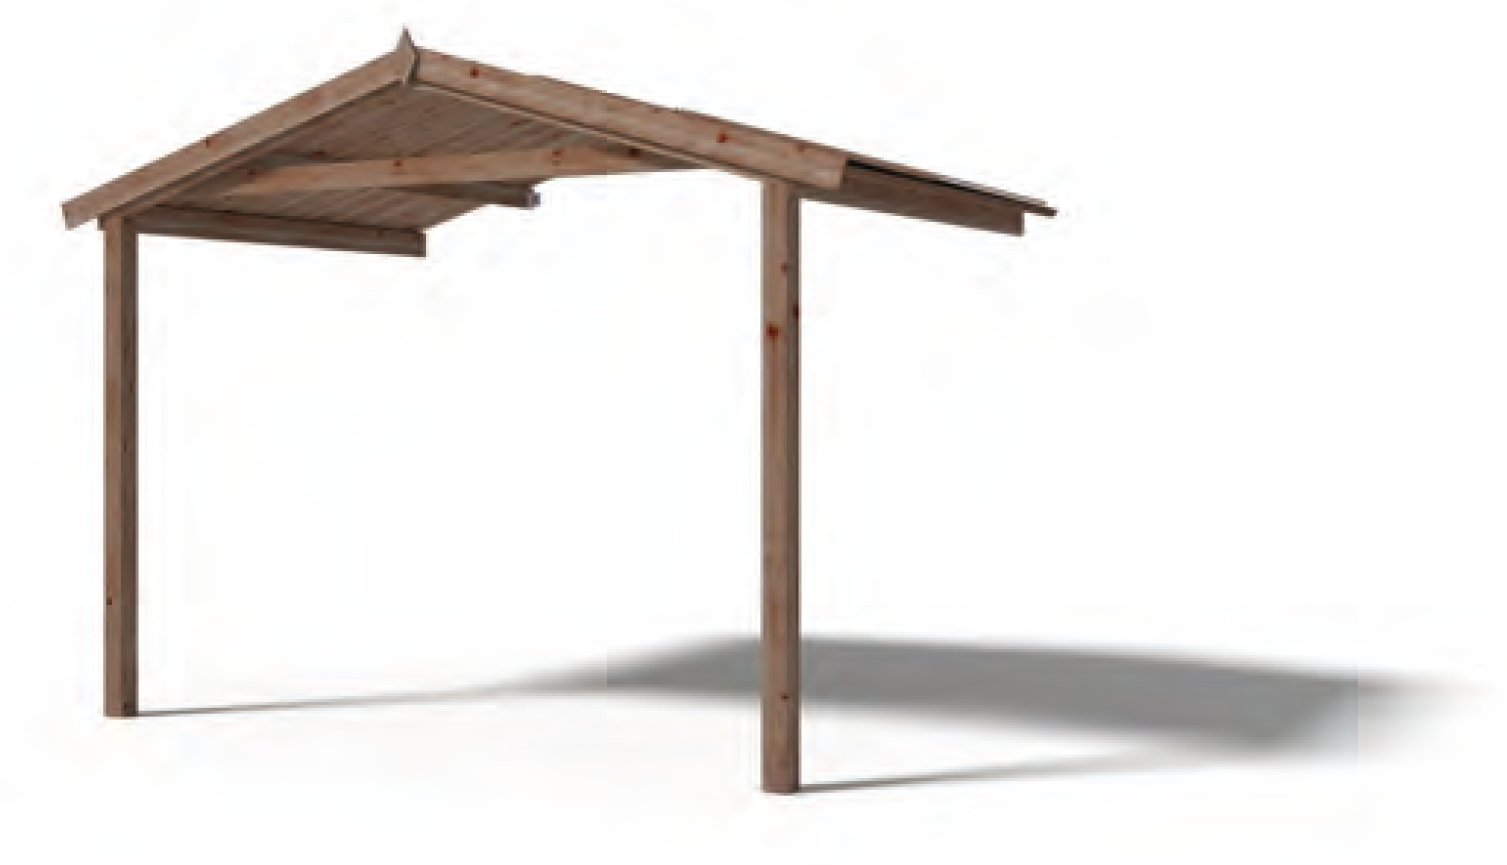 Riga roof and balcony for shelter in brown wood 300 x 200 cm